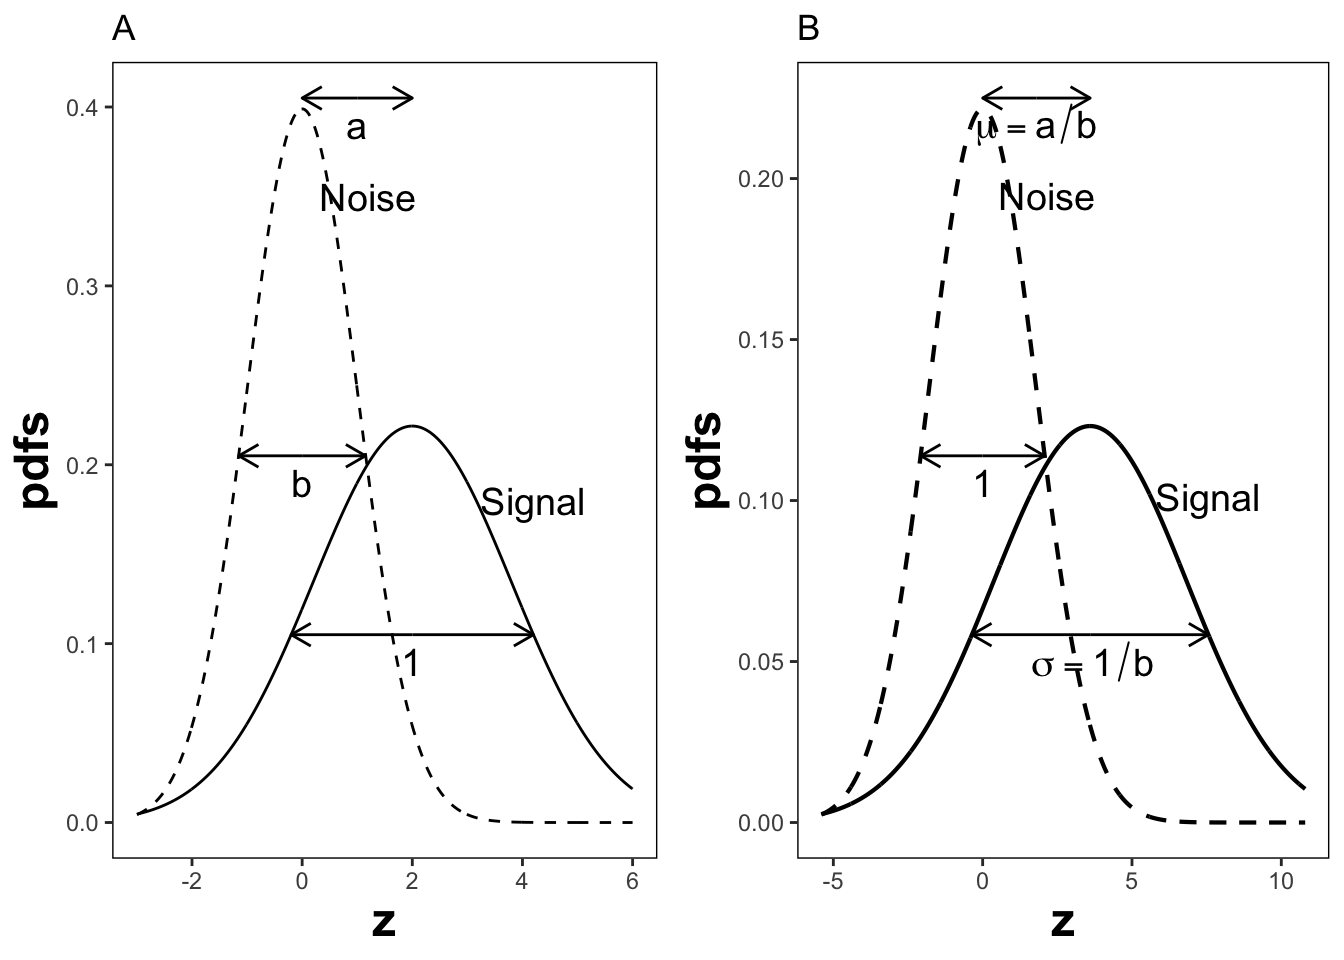 Plot A shows the definitions of the (a,b) parameters of the binormal model. In plot B the x-axis has been rescaled so that the noise distribution has unit variance, thereby illustrations between (a,b) and the ($\mu,\sigma$) parameters.